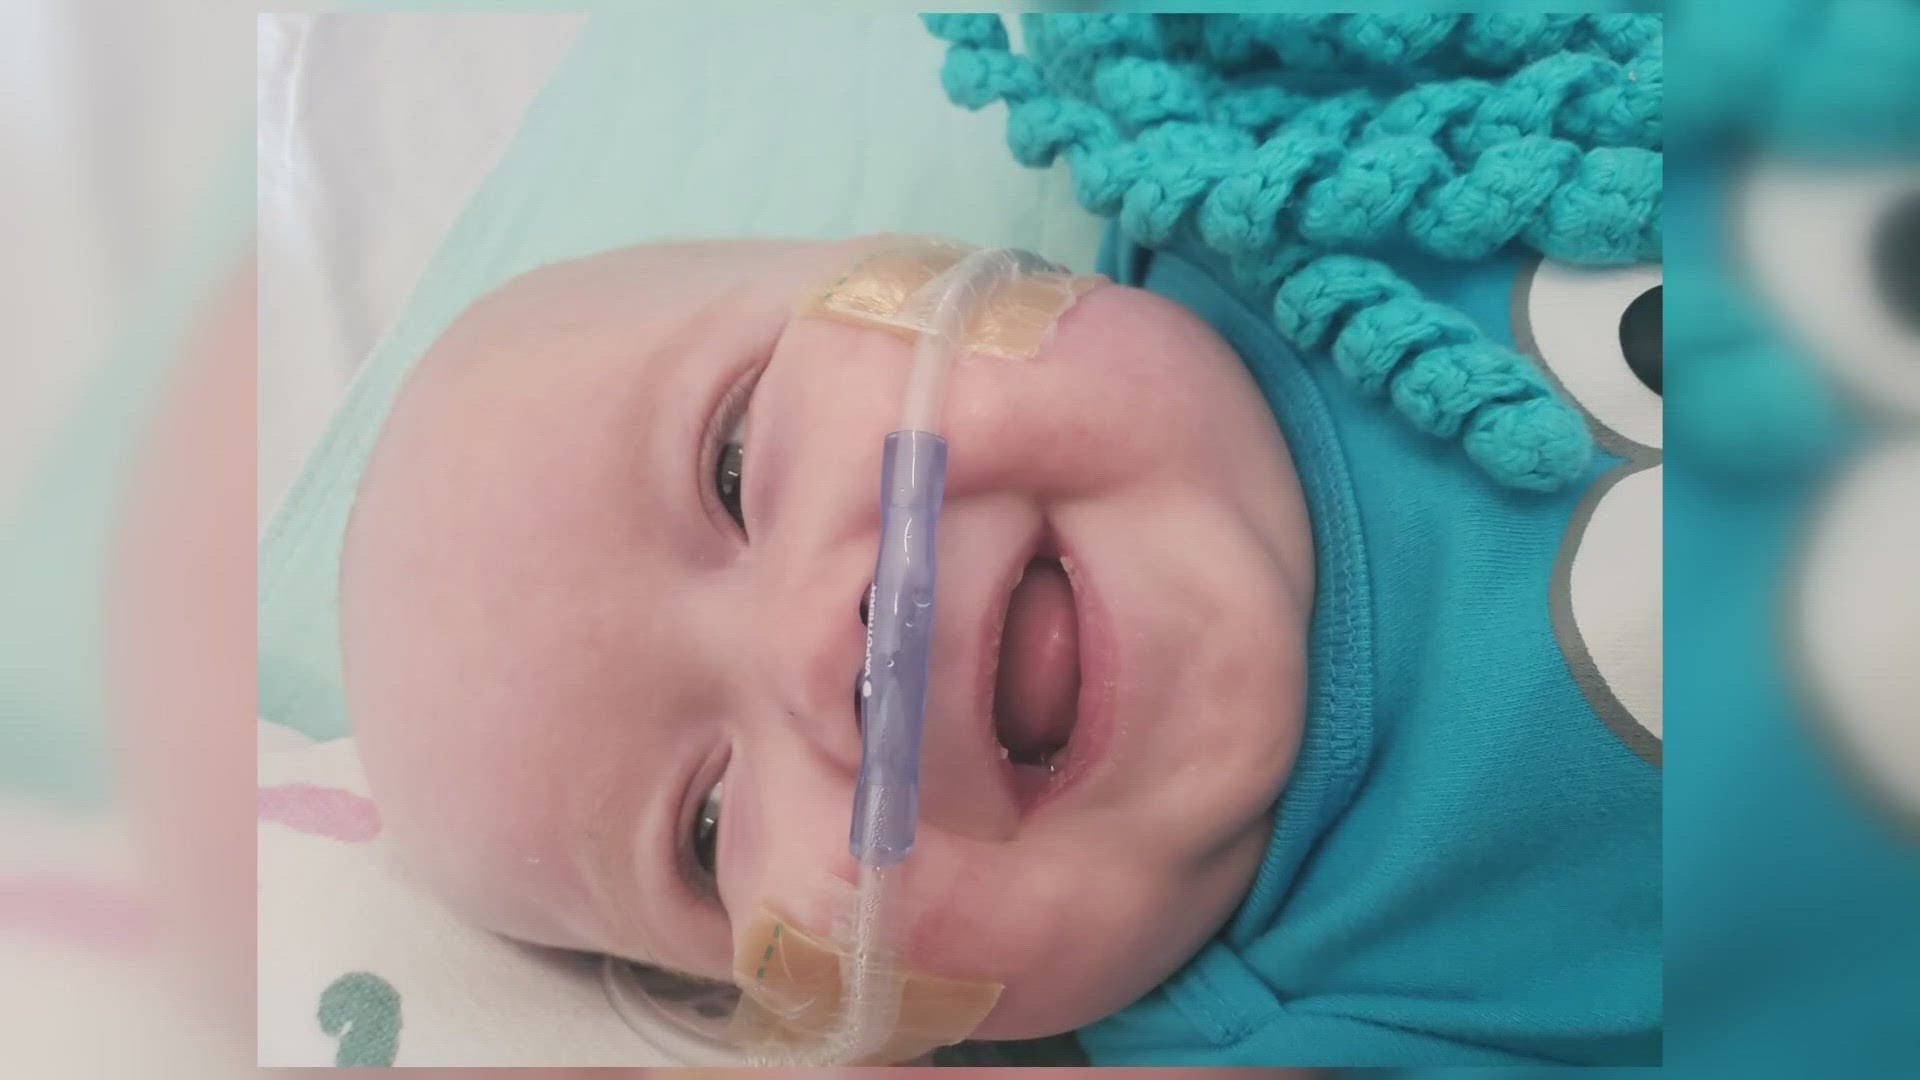 Cody Simmons, who just turned one year old, has spent nearly all of his life in the hospital.